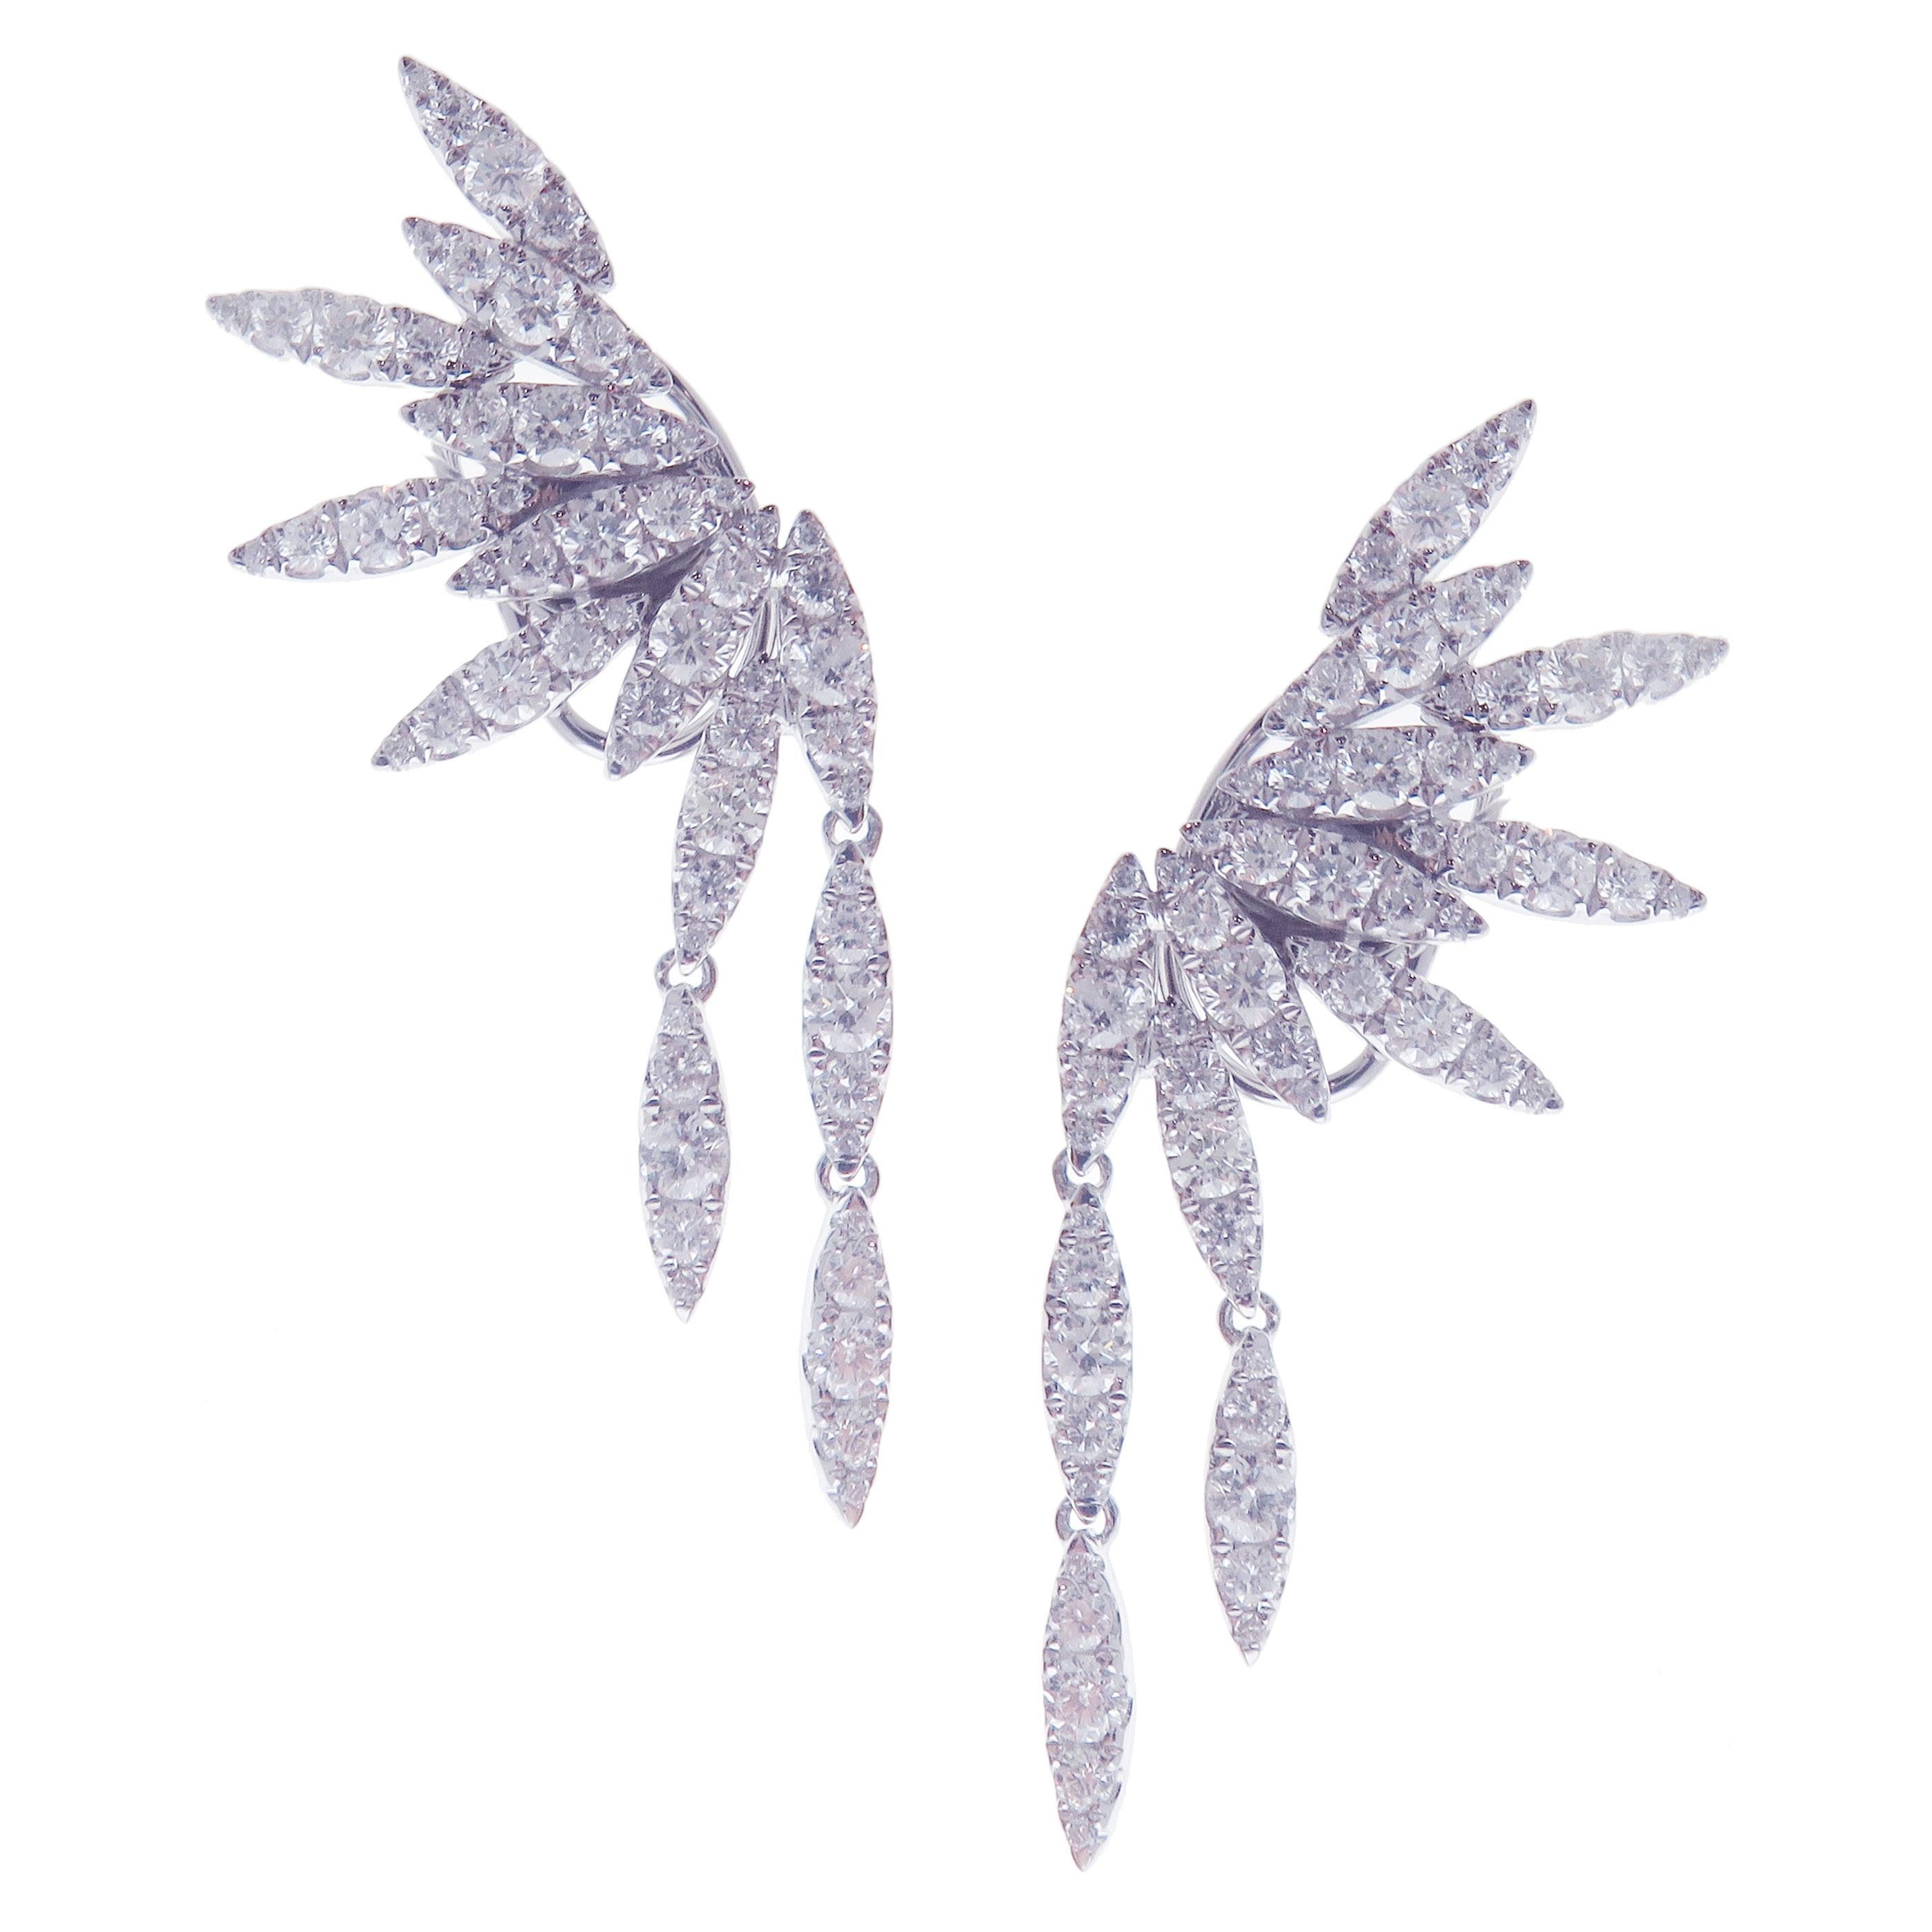 These trendy pave diamond wing crawler earrings with white diamonds are crafted in 18-karat white gold, featuring 130 round white diamonds totaling of 2.66 carats.
18-karat yellow gold are also available upon request.
Approximately 1.75''